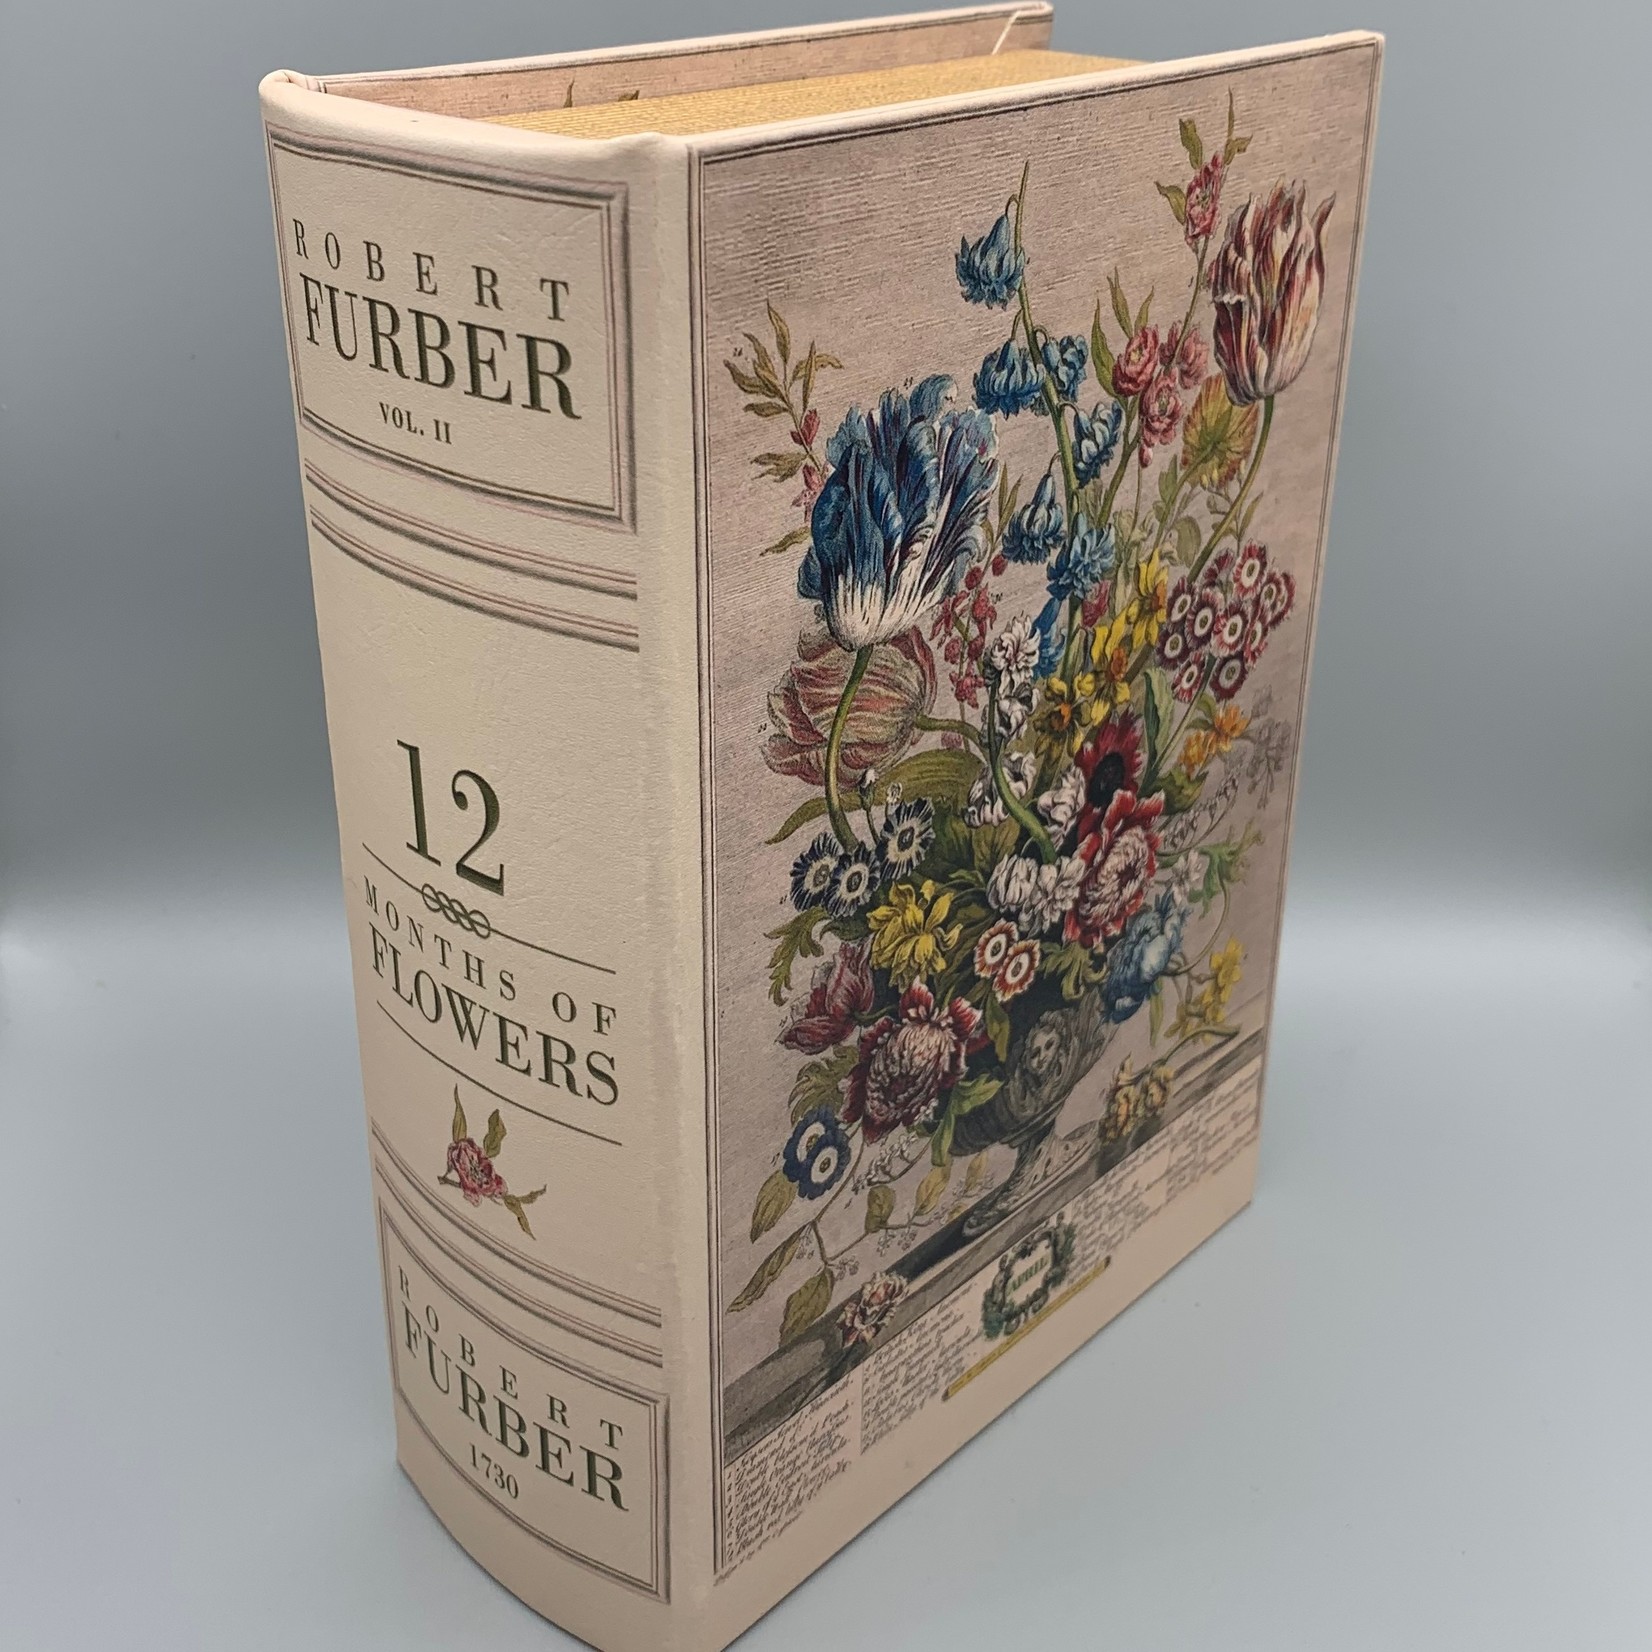 12 Months of Flowers Safe Book Box